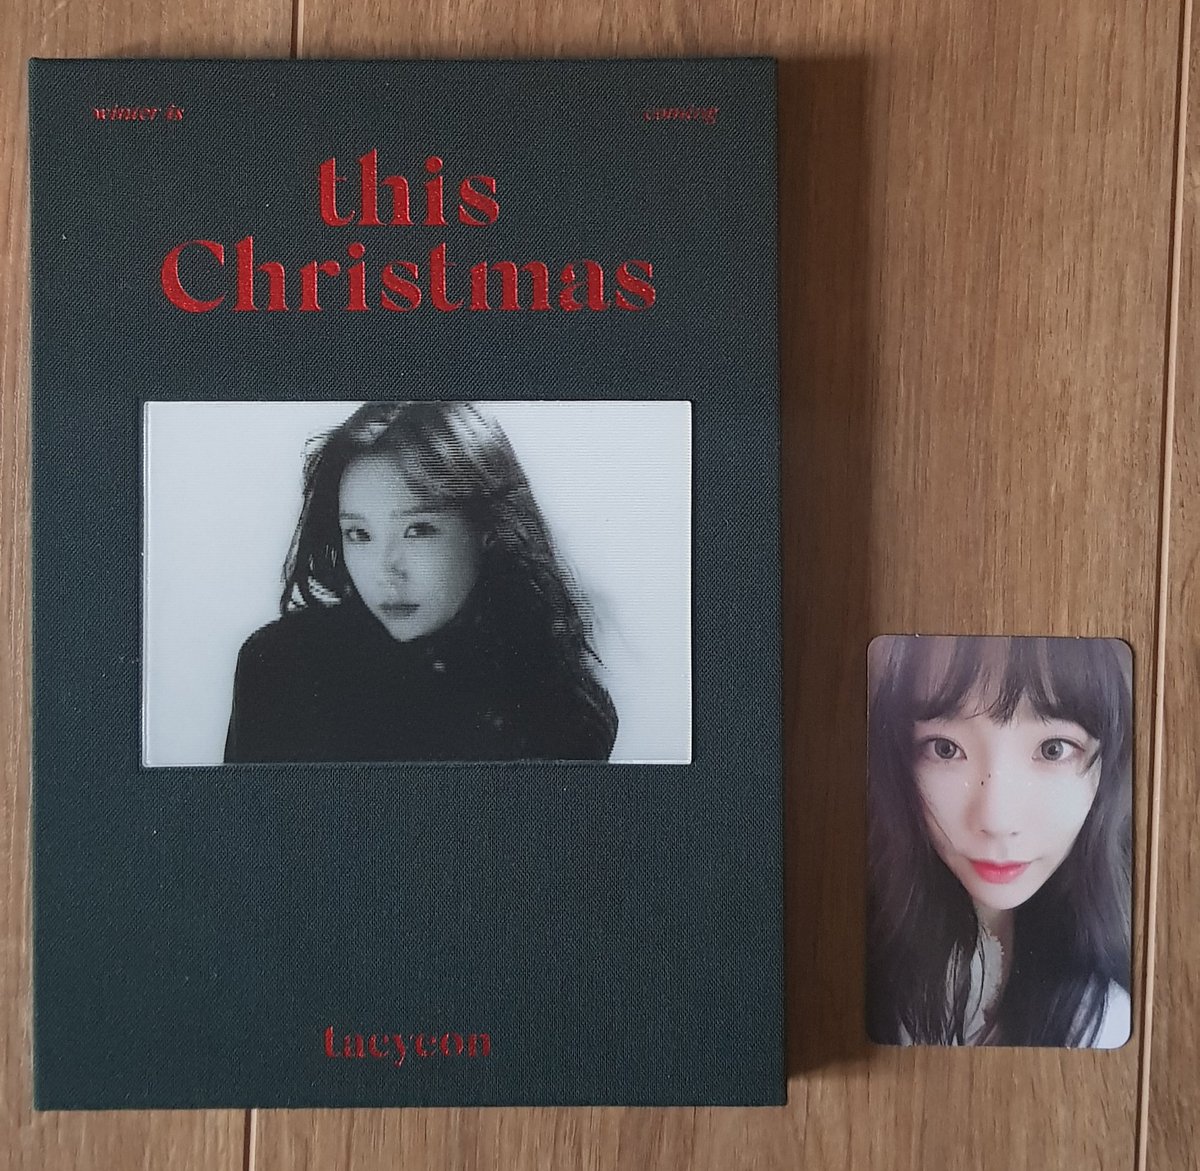 TAEYEON - this Christmas1 PhotocardFavorite Song : Christmas without you